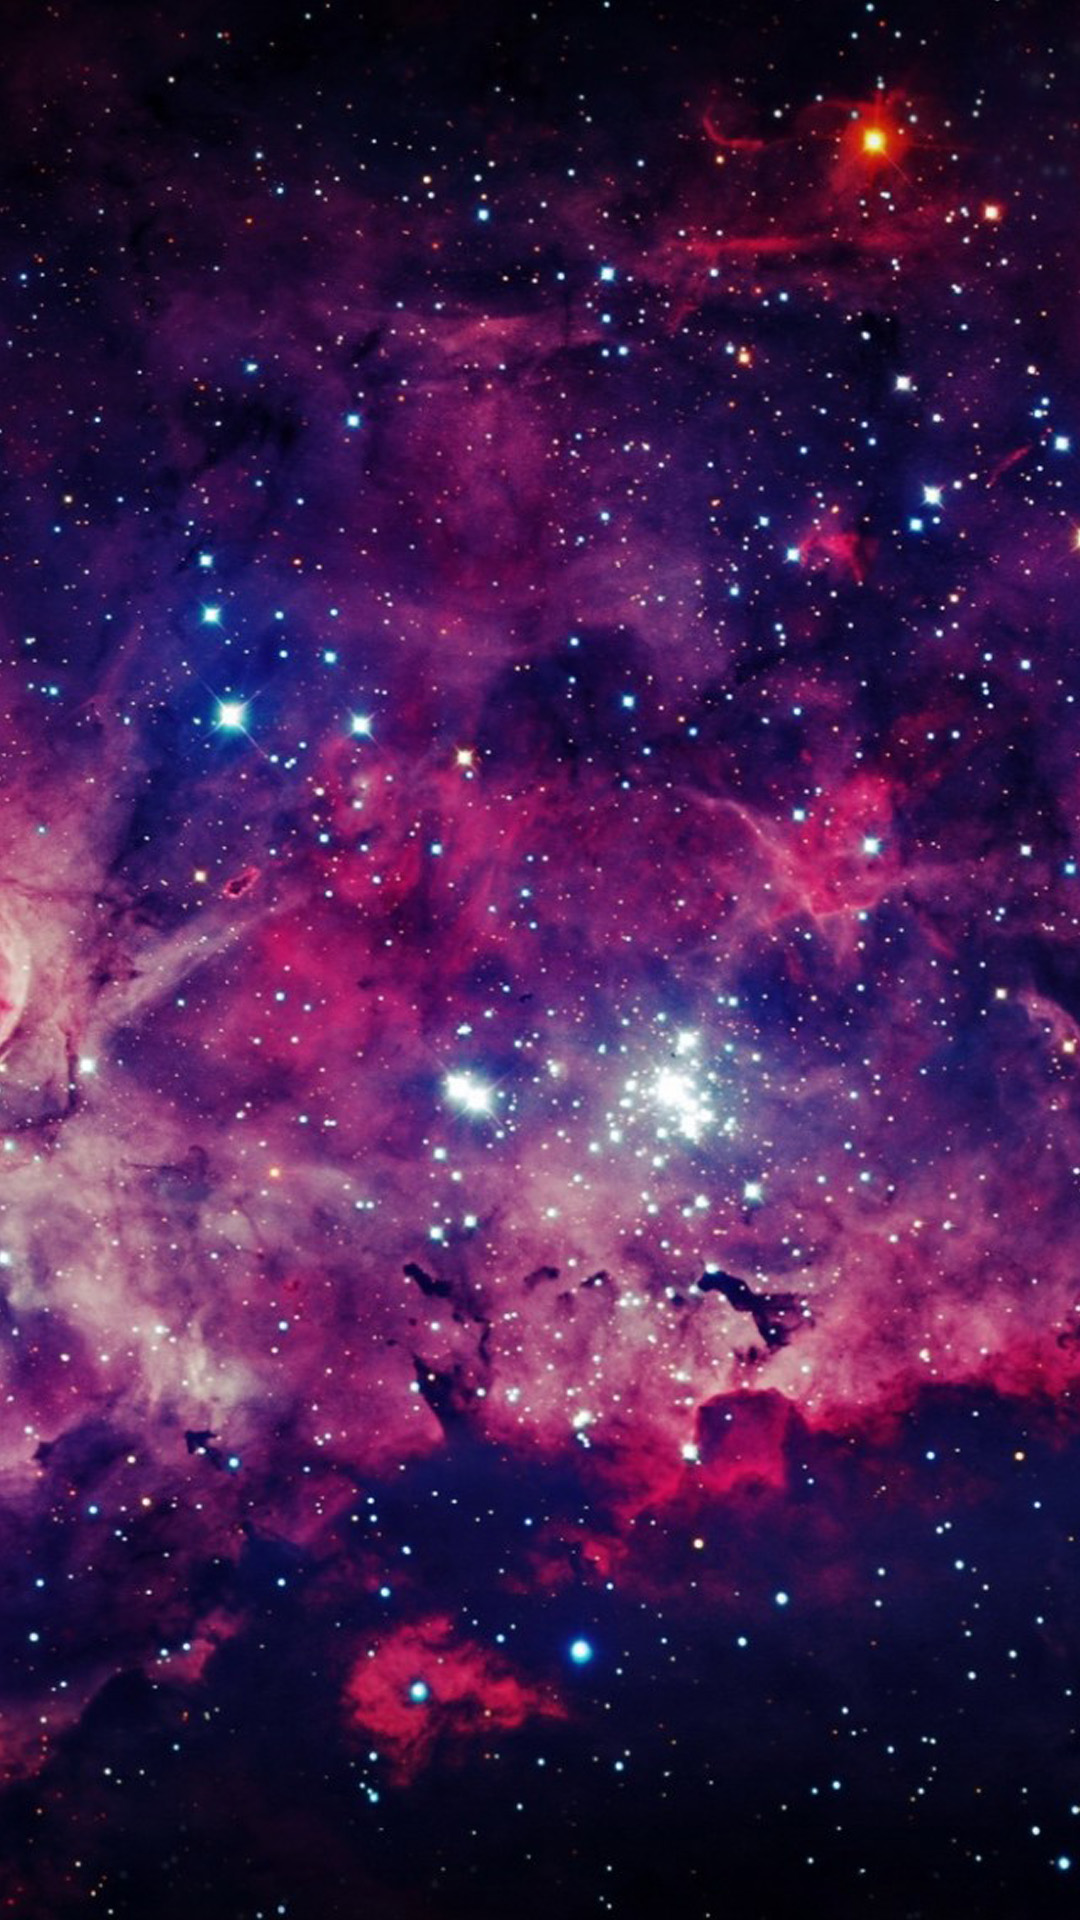 HD Space LG G2 Wallpapers